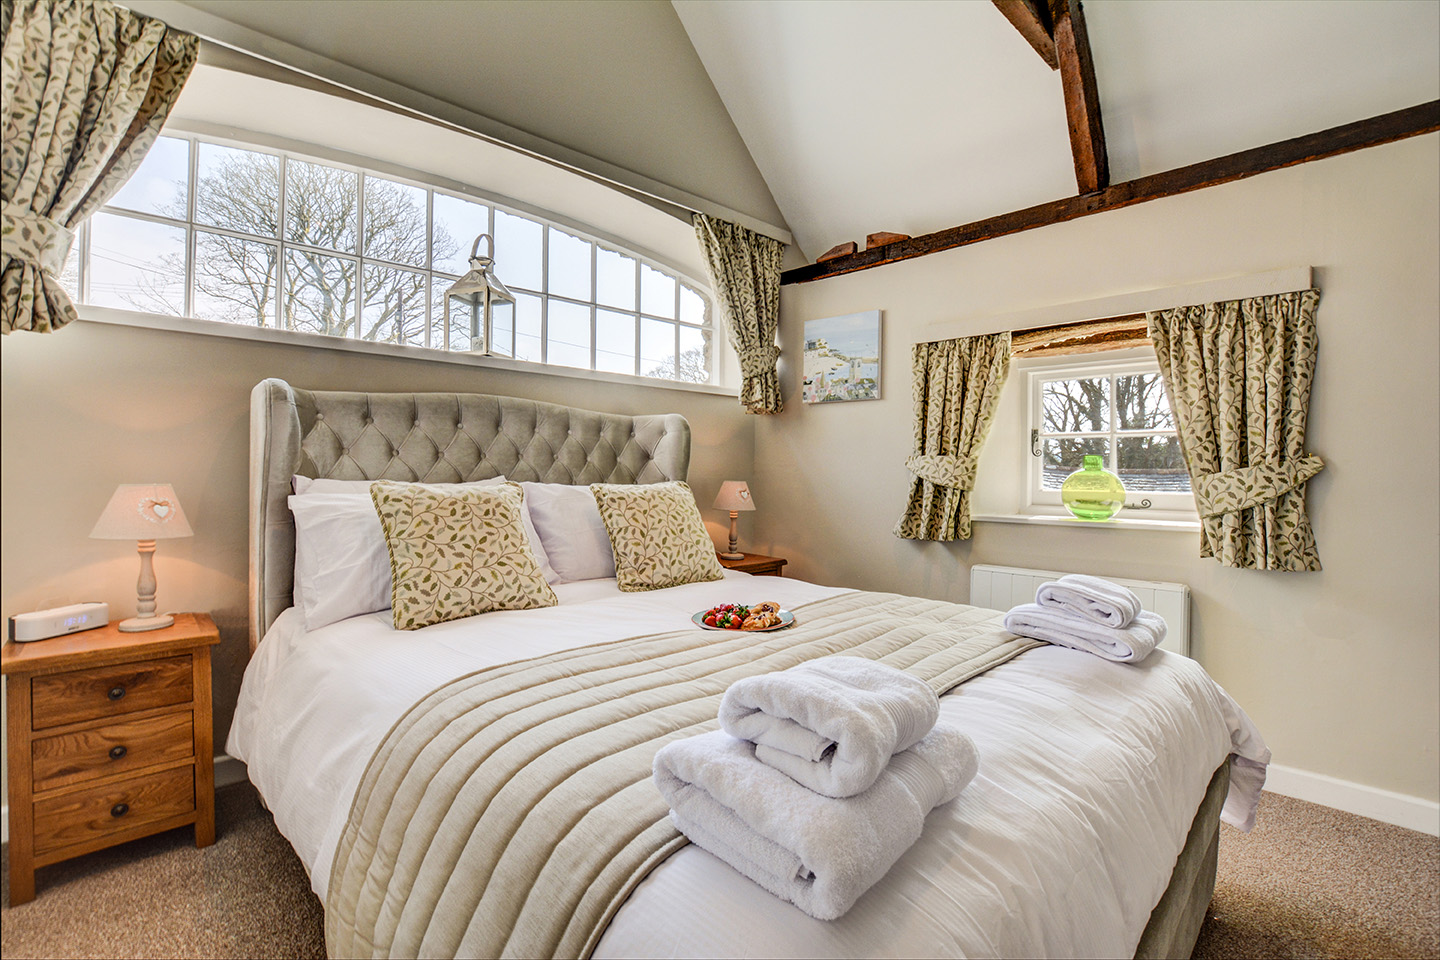 The bedroom at Jingles luxury self catering holiday cottage at Penrose Burden in North Cornwall near Bodmin Moor02.jpg